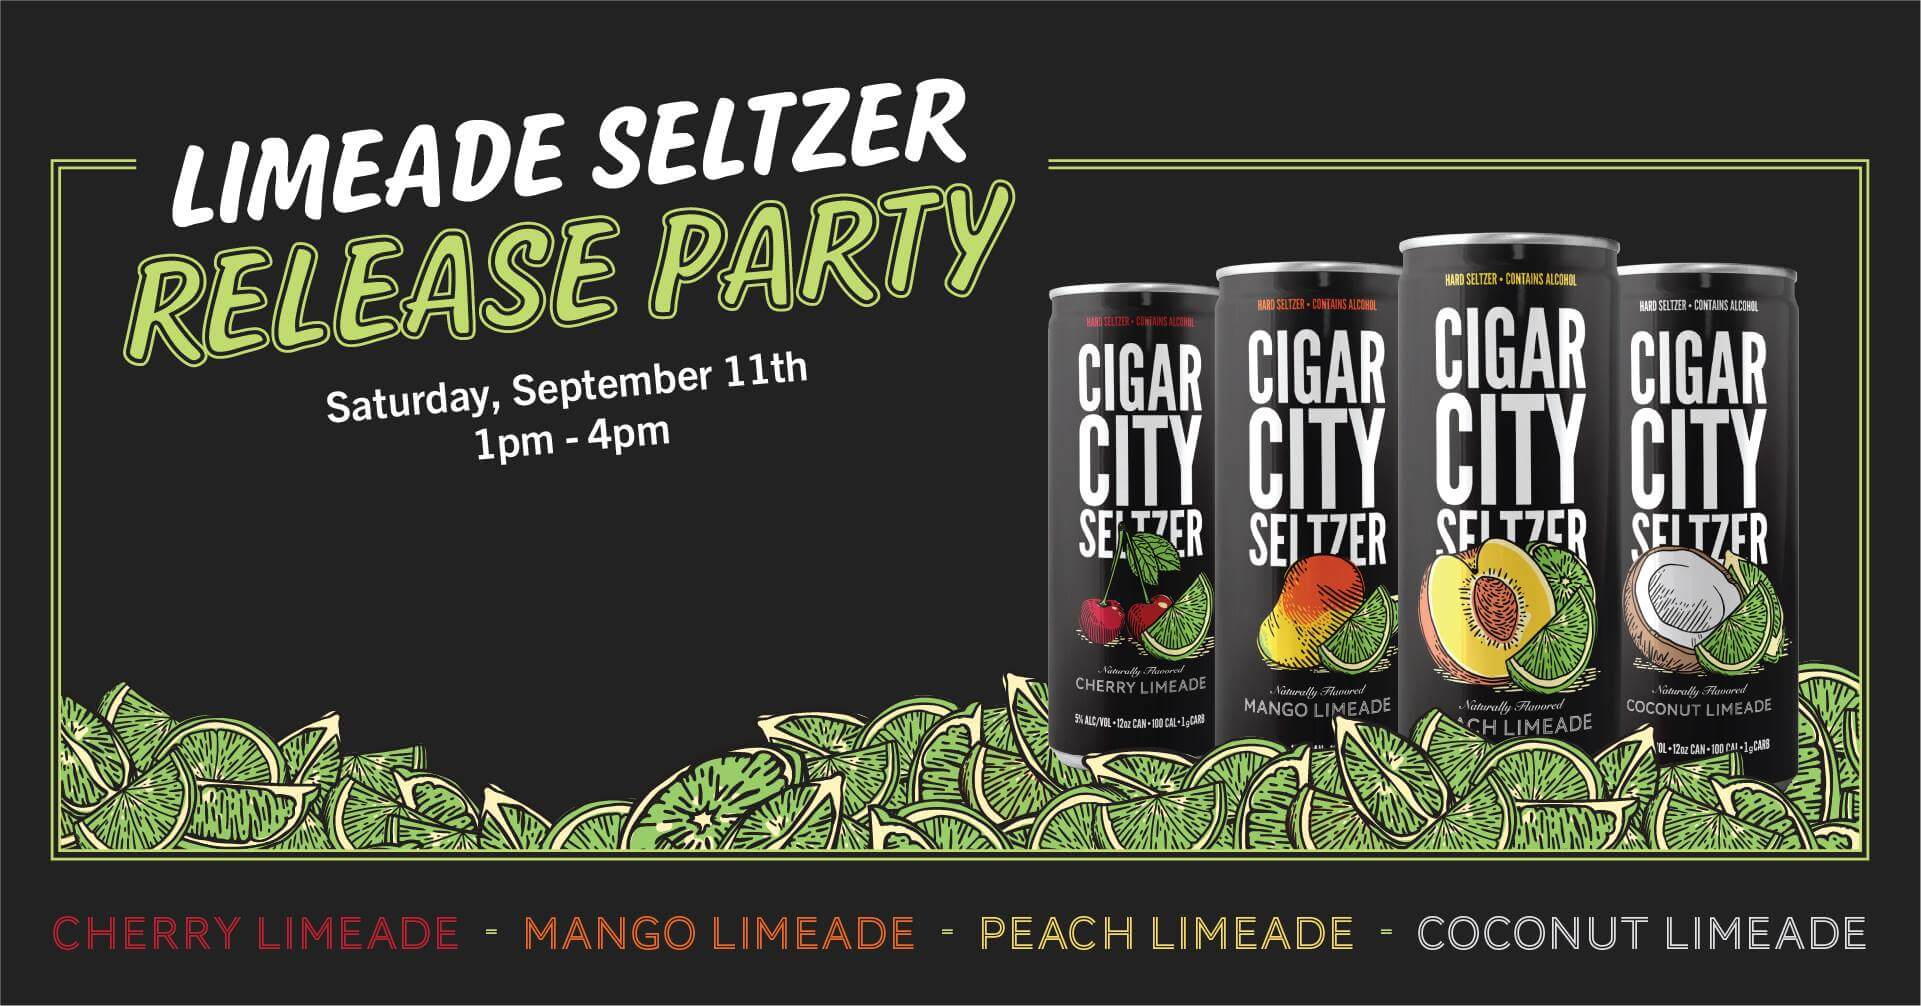 Cigar City Seltzer Limeade Kickoff Party banner graphic